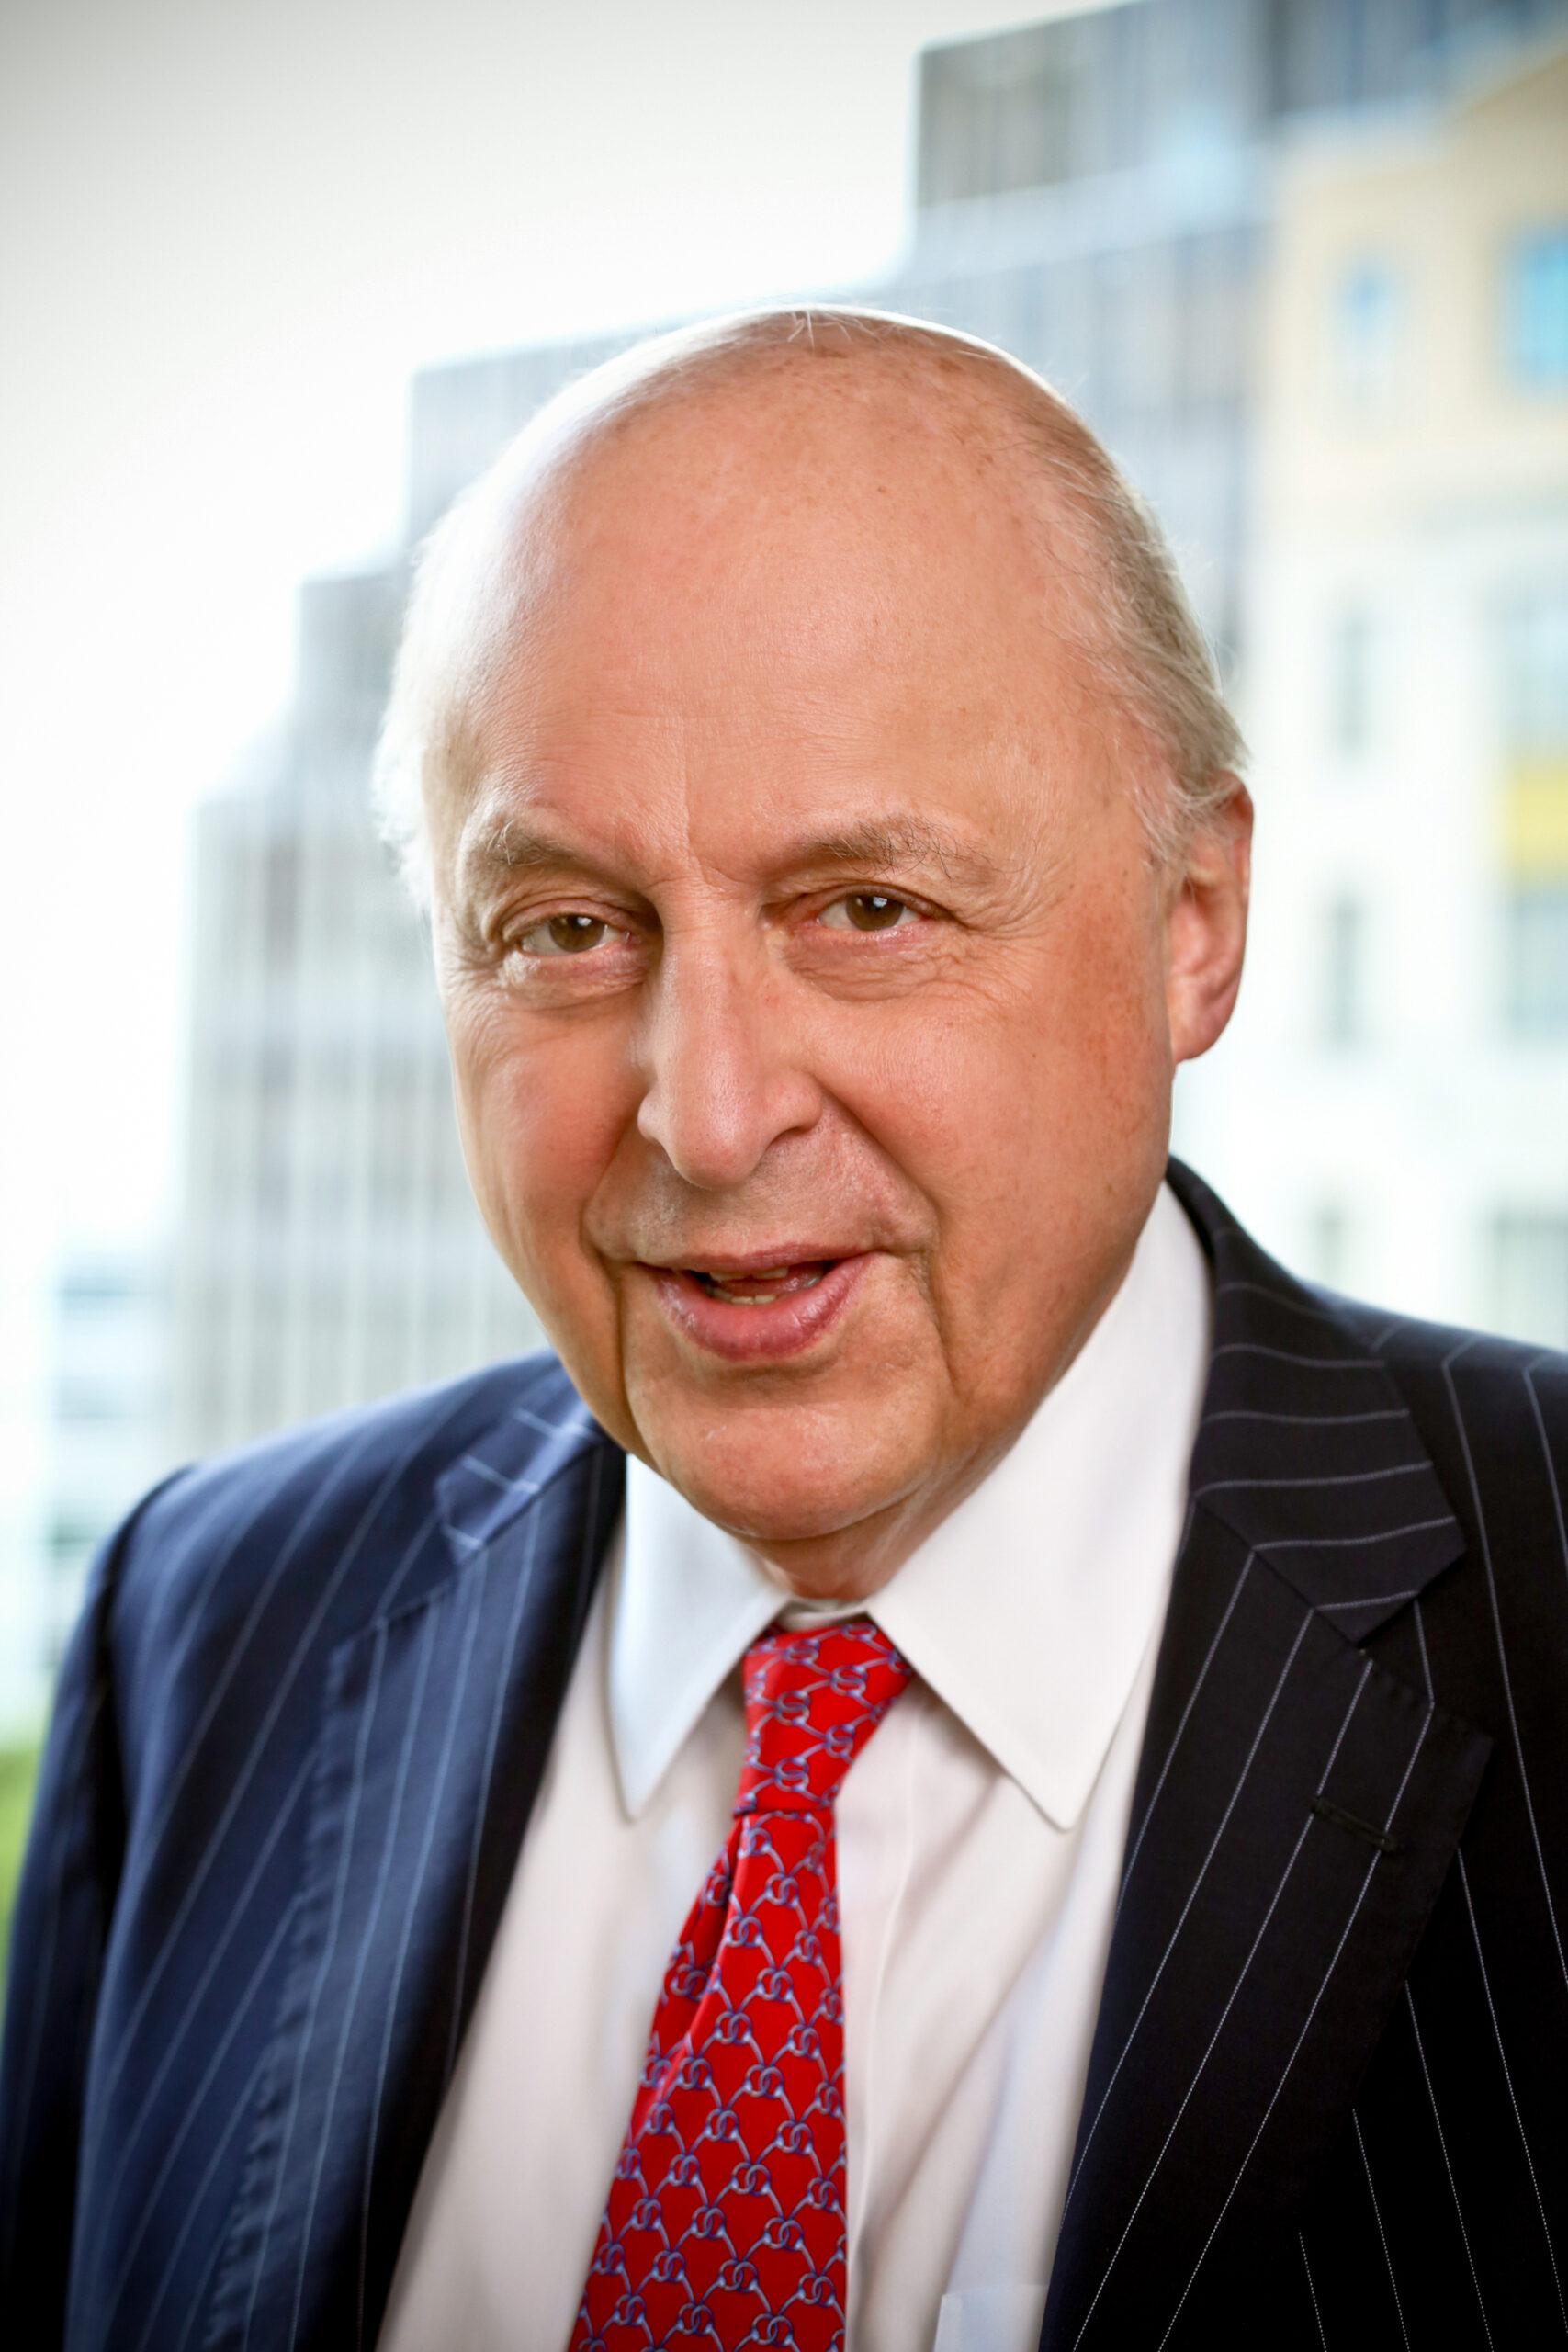 America's Foreign Policy in a World of Turmoil  ||  Ambassador John Negroponte